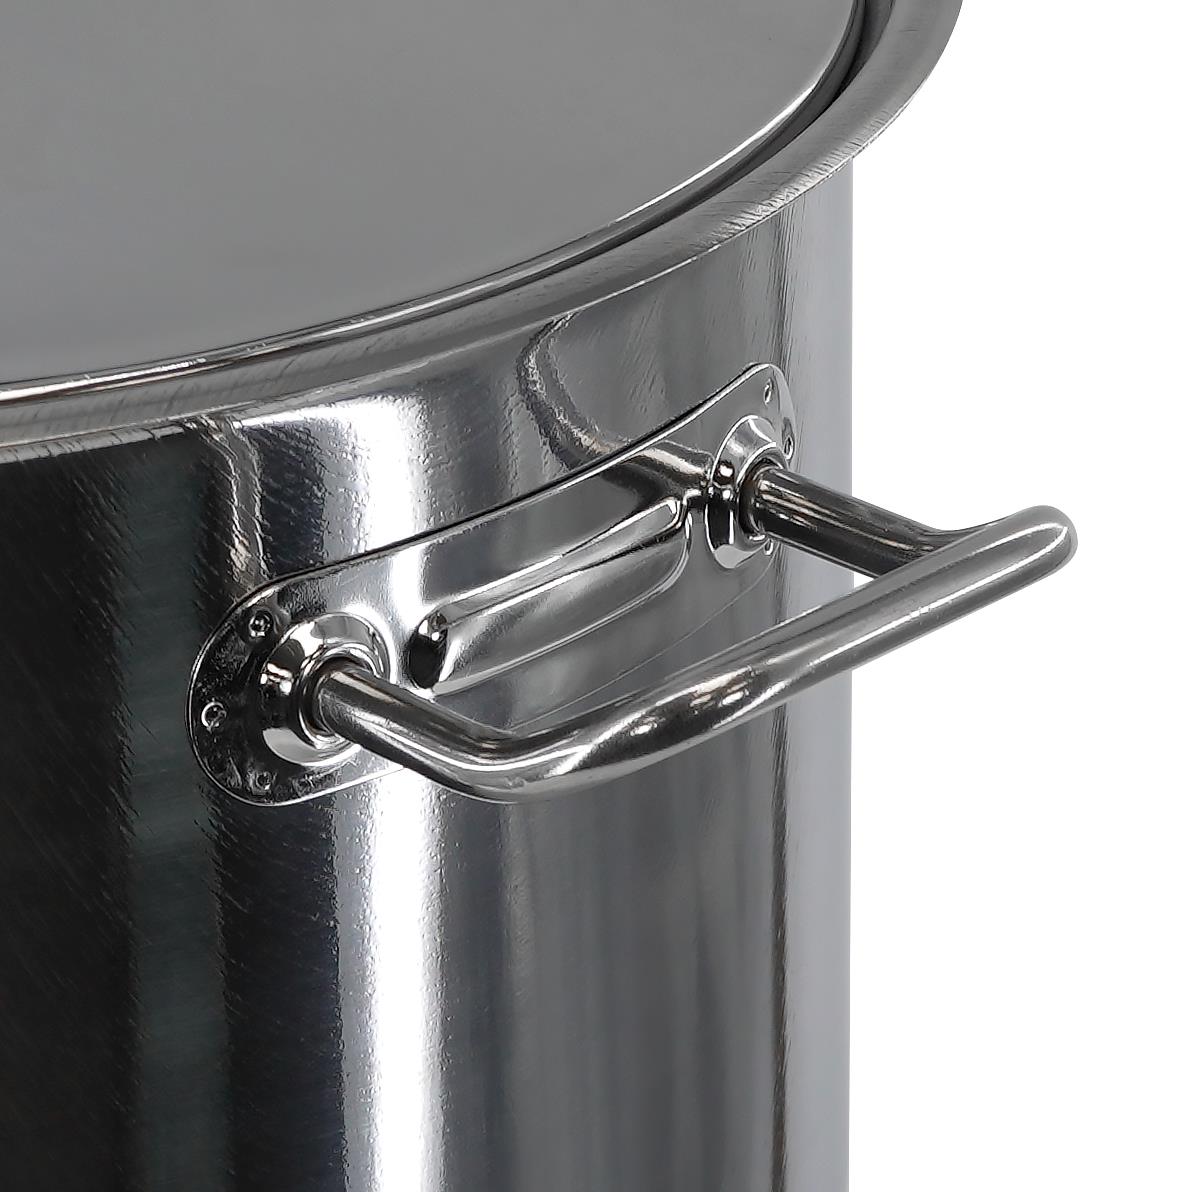 Arian Gastro Stock Pot - 11 Litre by GEEZY - UKBuyZone